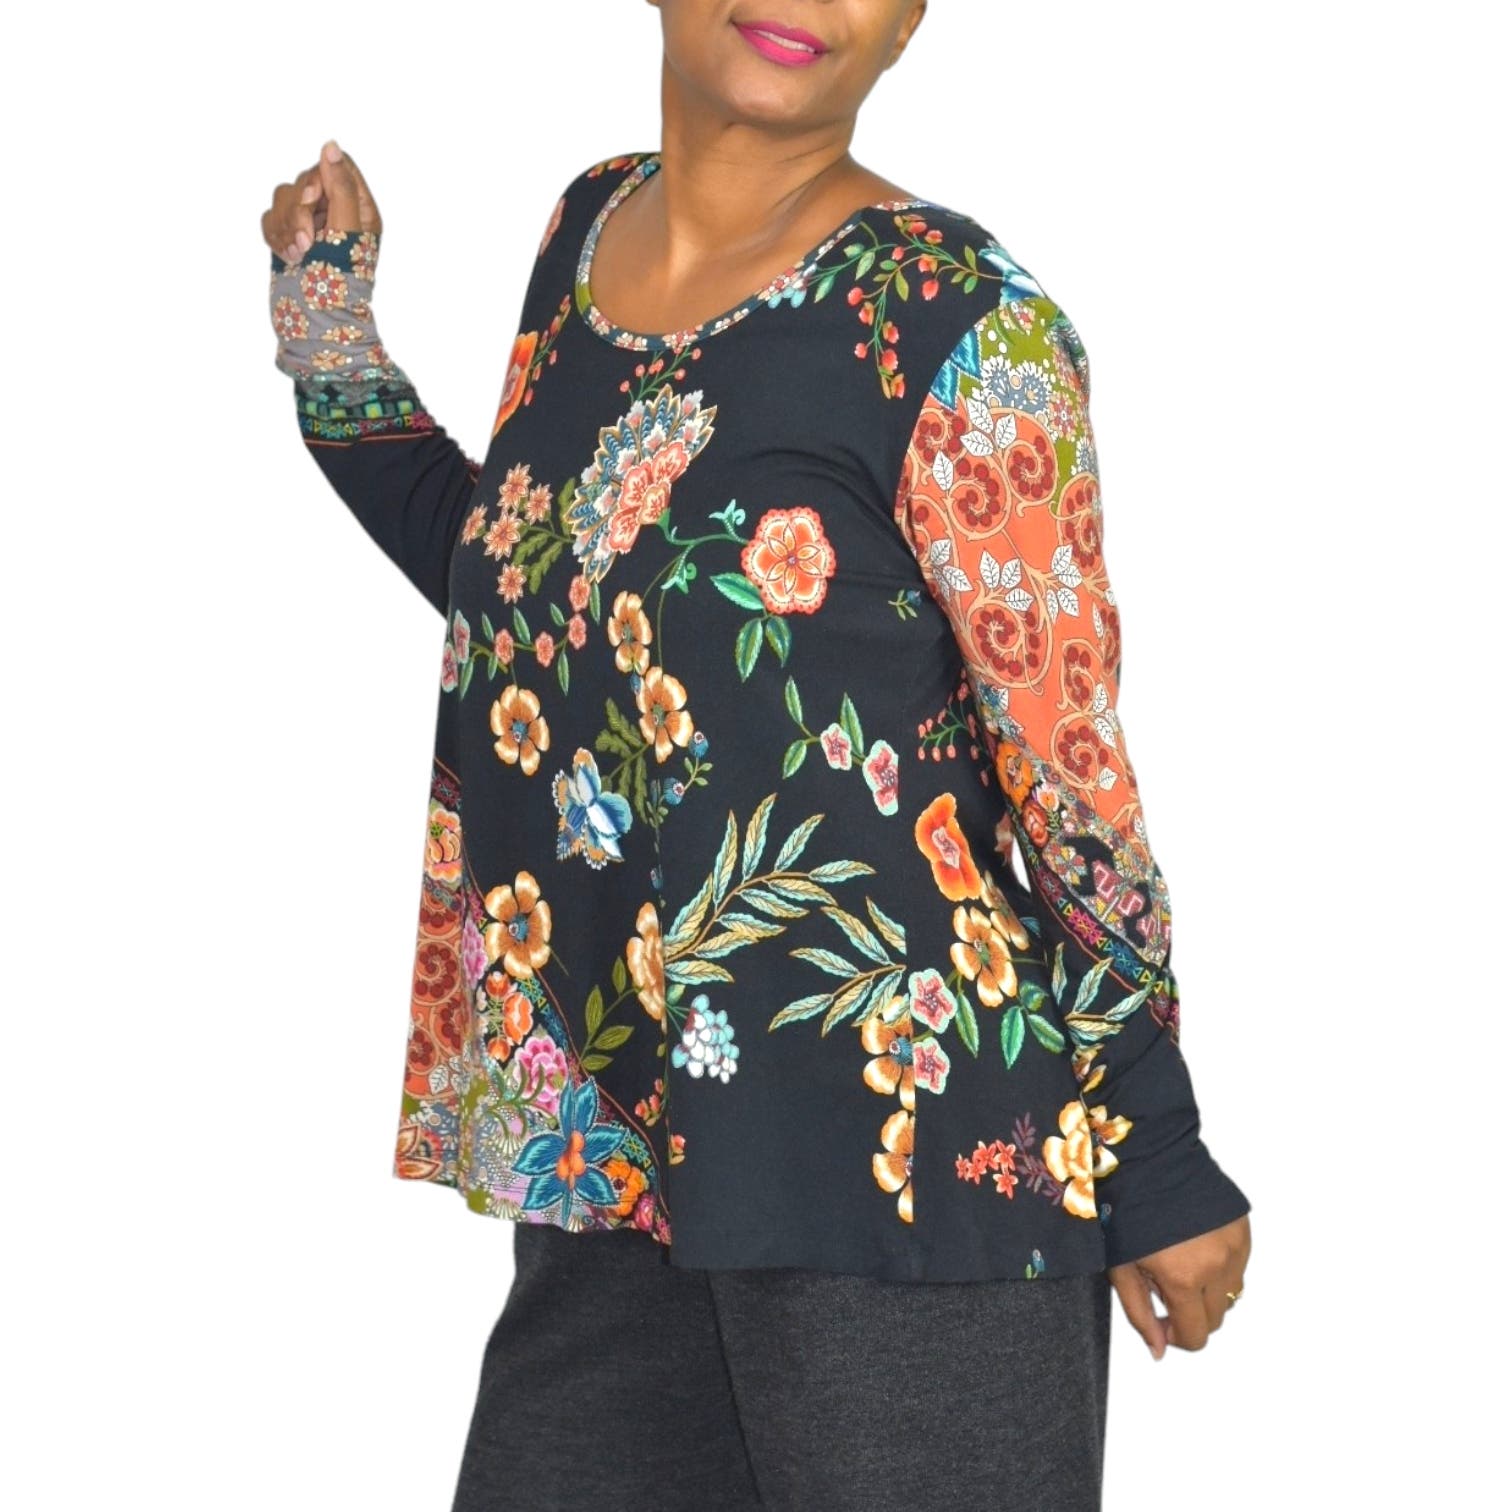 Johnny Was Ardell Favorite Top Floral Patchwork Long Sleeve T Shirt Tee JWLA Bamboo Size Medium